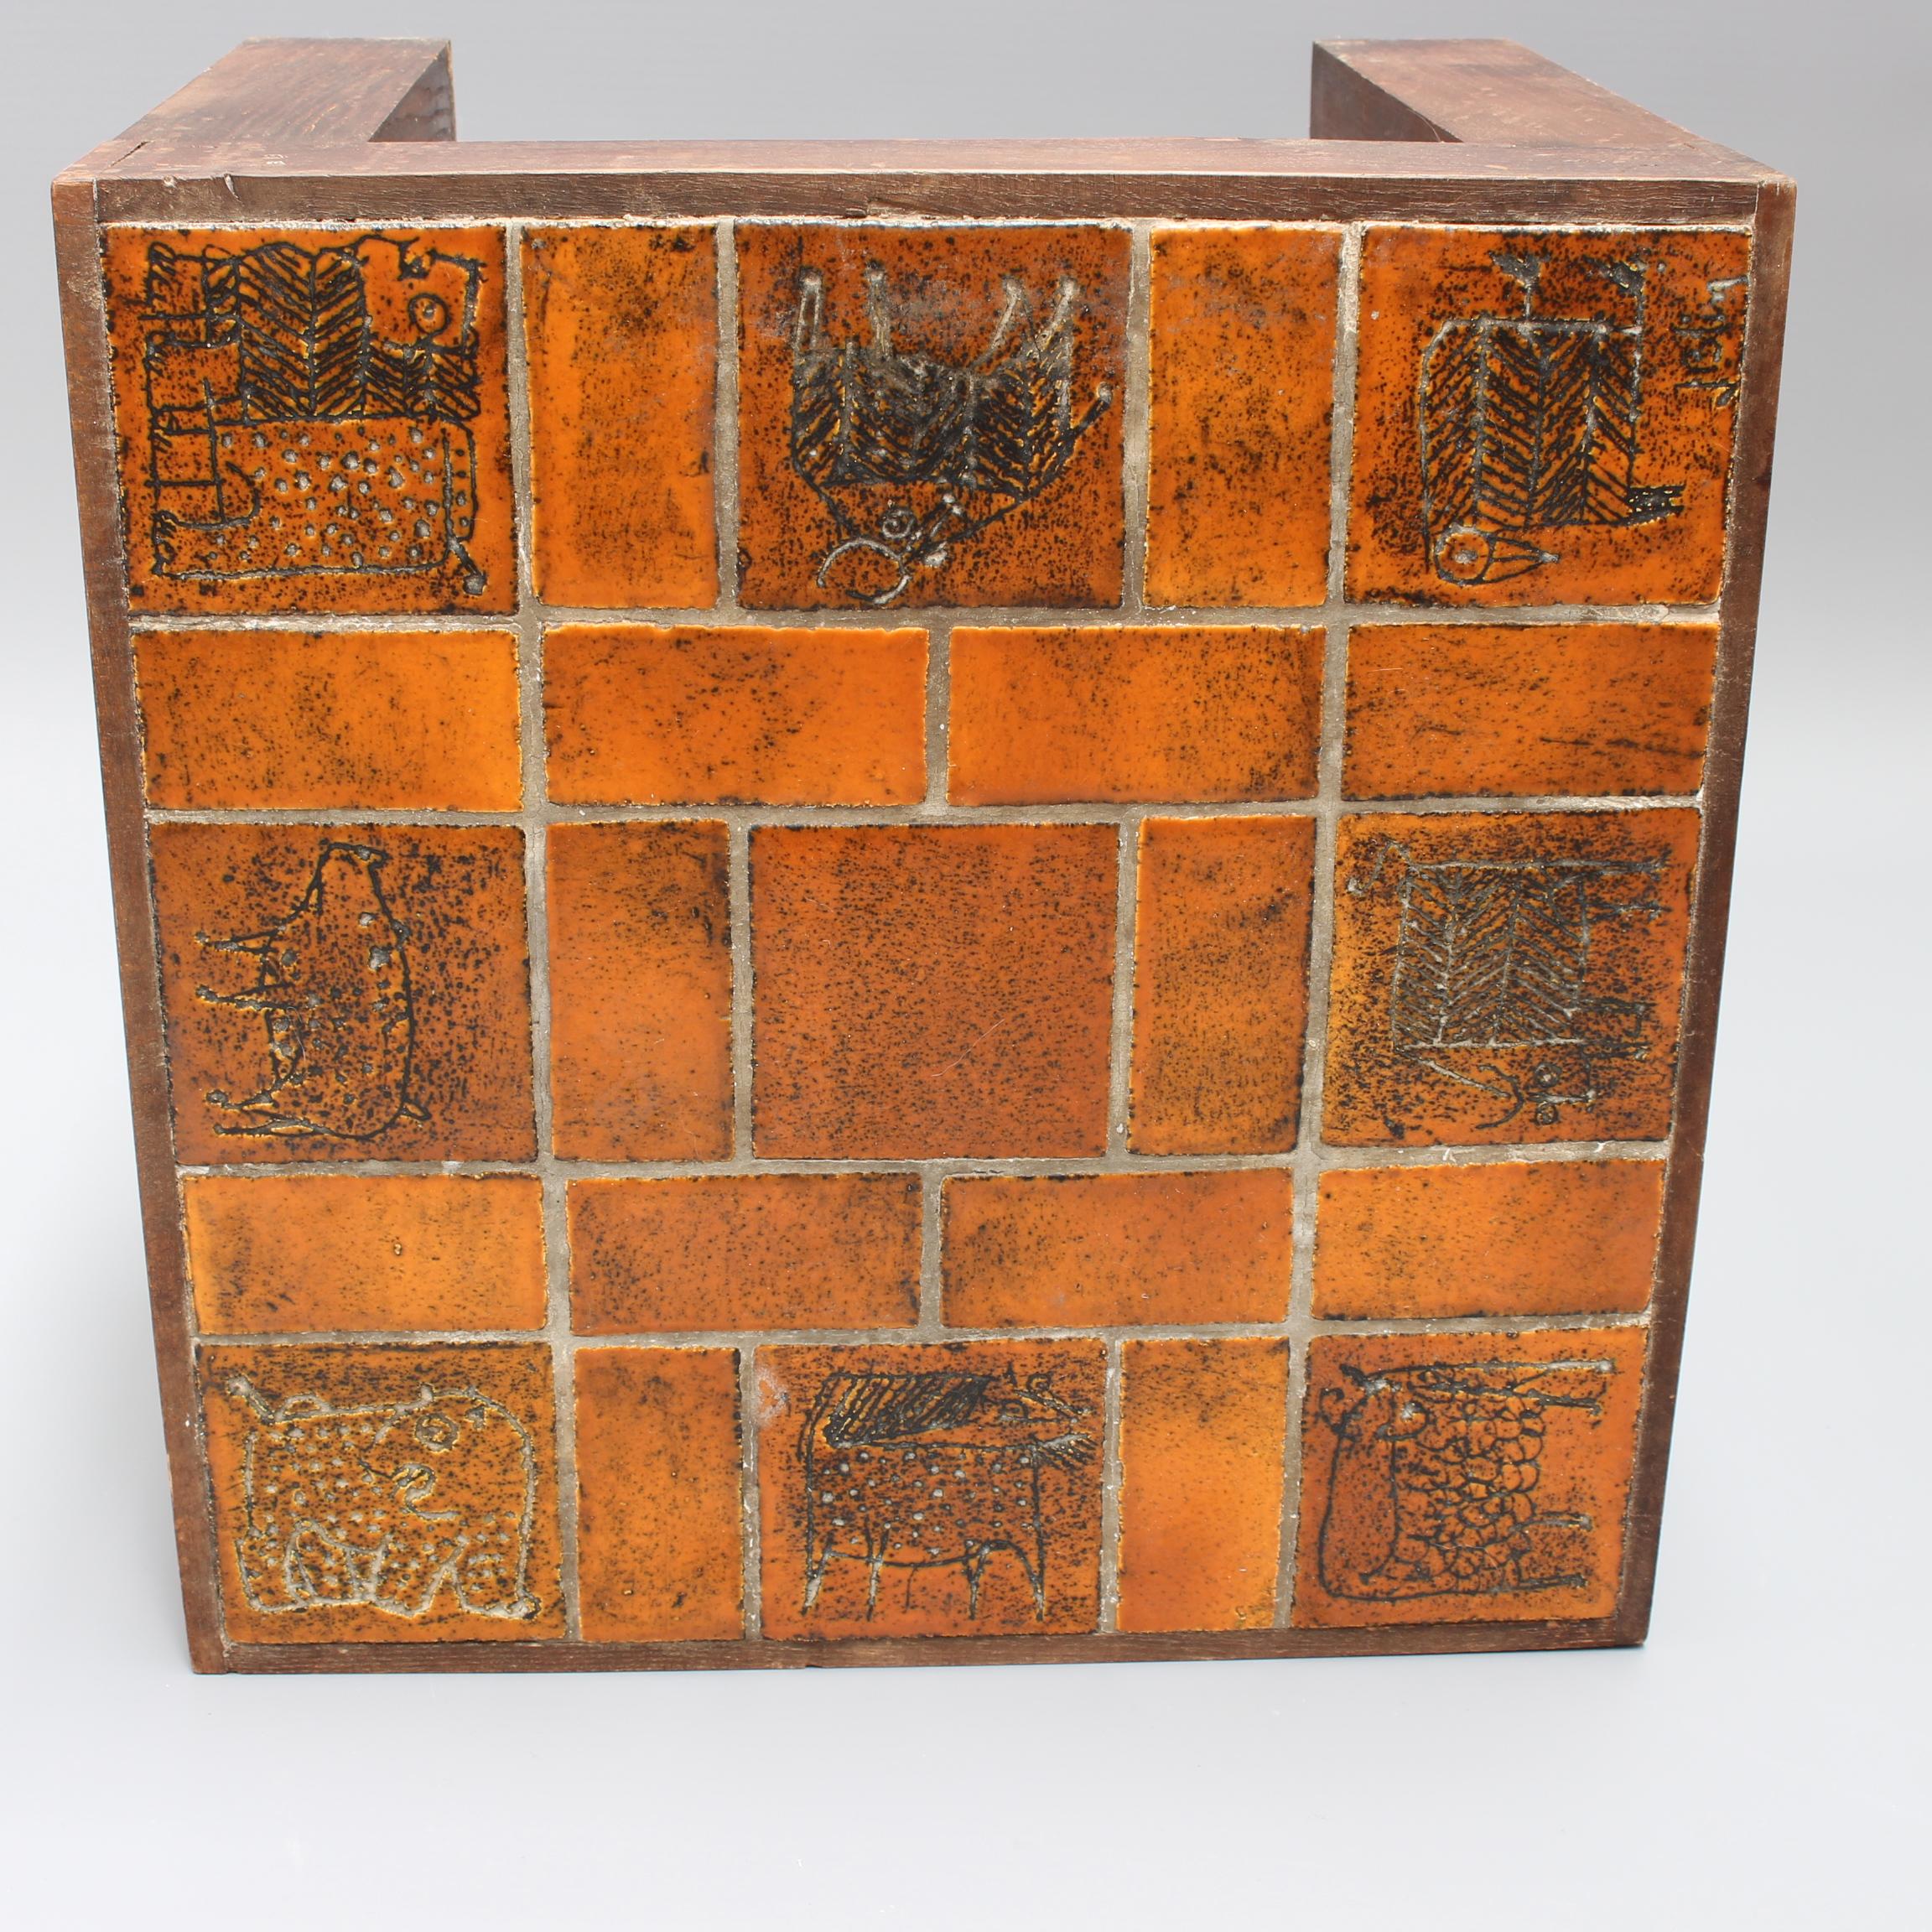 Mid-Century French square side table with ceramic tile top by Jacques Blin (circa 1950s). Earthenware tiles in Blin's burnt clay colour are decorated with incised, stylised animals supported by a simple wooden base. One of the tiles is signed: 'J.